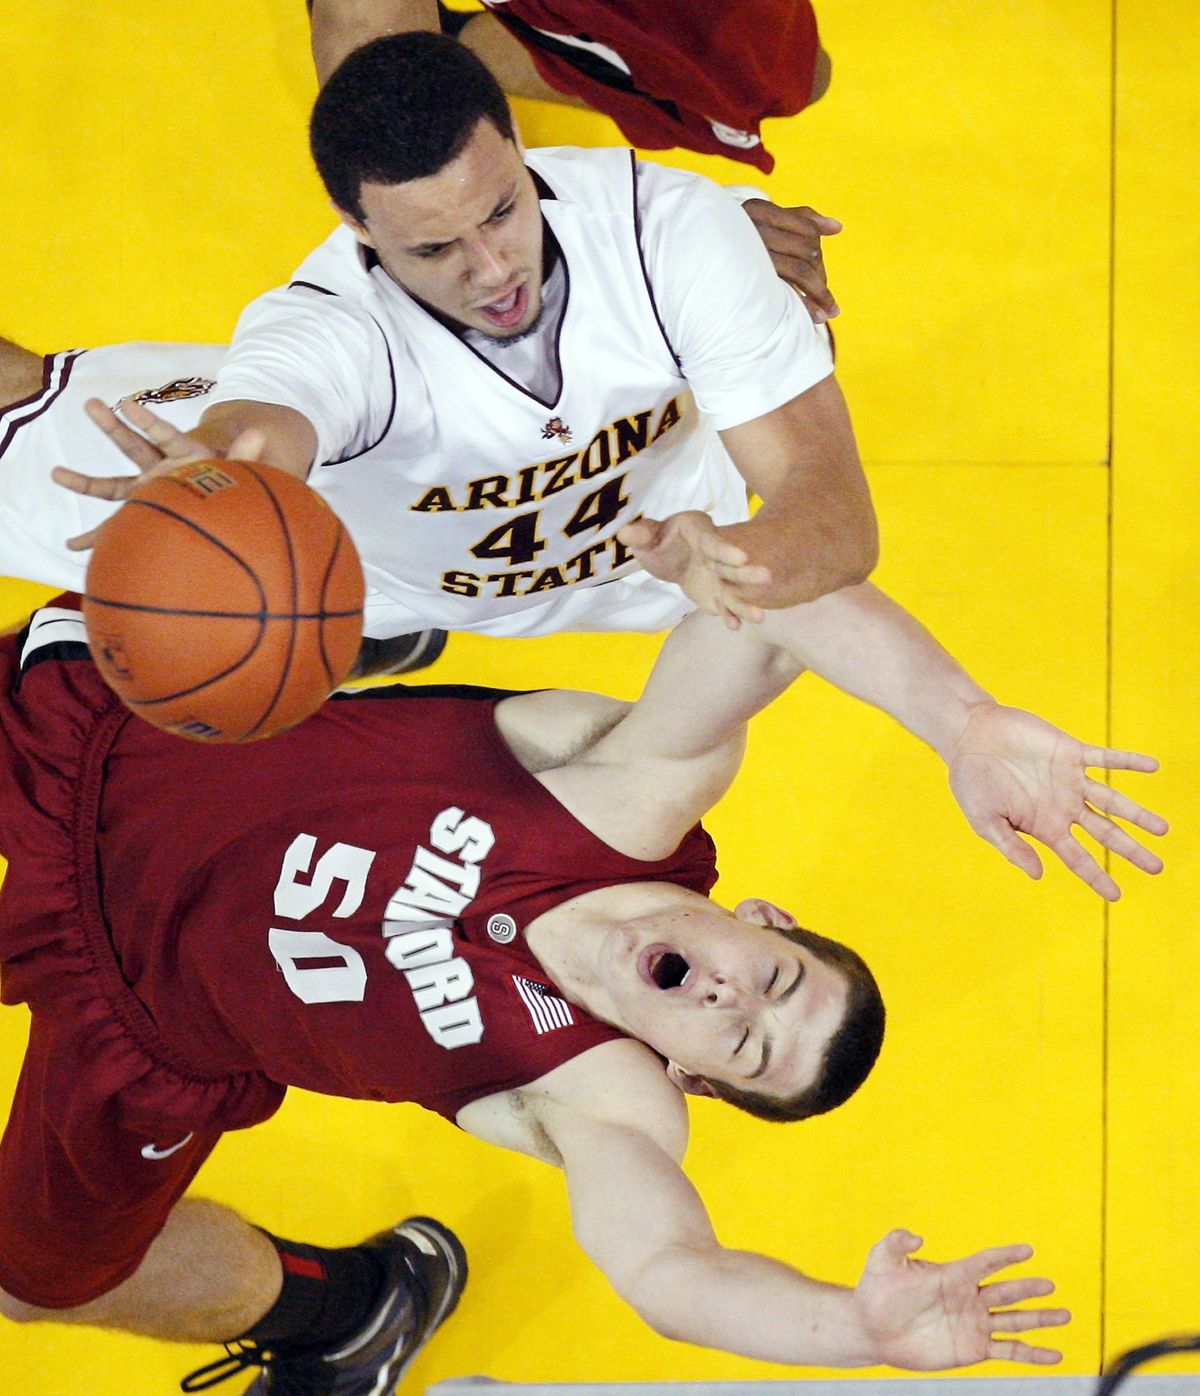 Arizona State’s Jerren Shipp, top, knocks over Stanford’s Jack Trotter as he goes up for a shot.  (Associated Press)